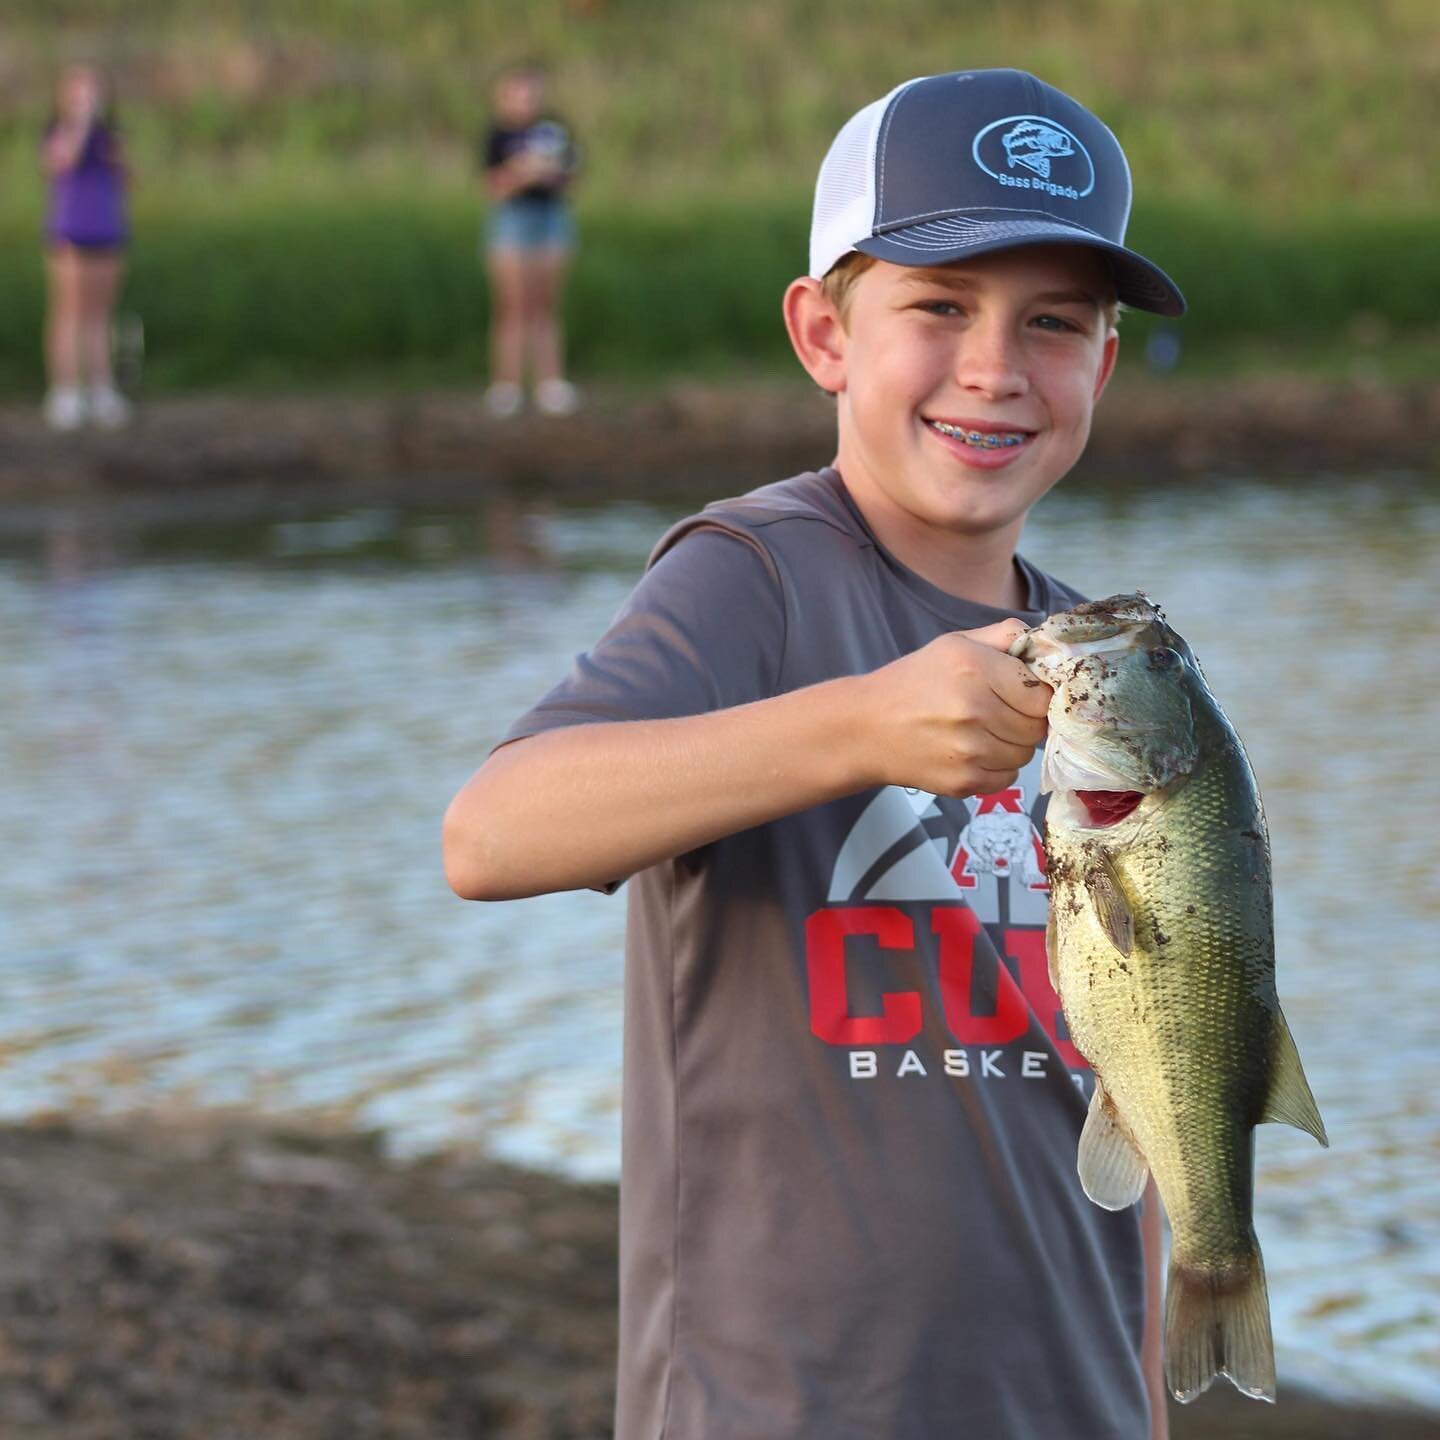 Camp Highlight &mdash; Bass Brigade

The 16th Battalion of Bass Brigade took place July 6-10 in Santa Anna, TX. Cadets learned all about aquatic ecosystems and natural resource management. Some of the activity highlights include electrofishing, casti